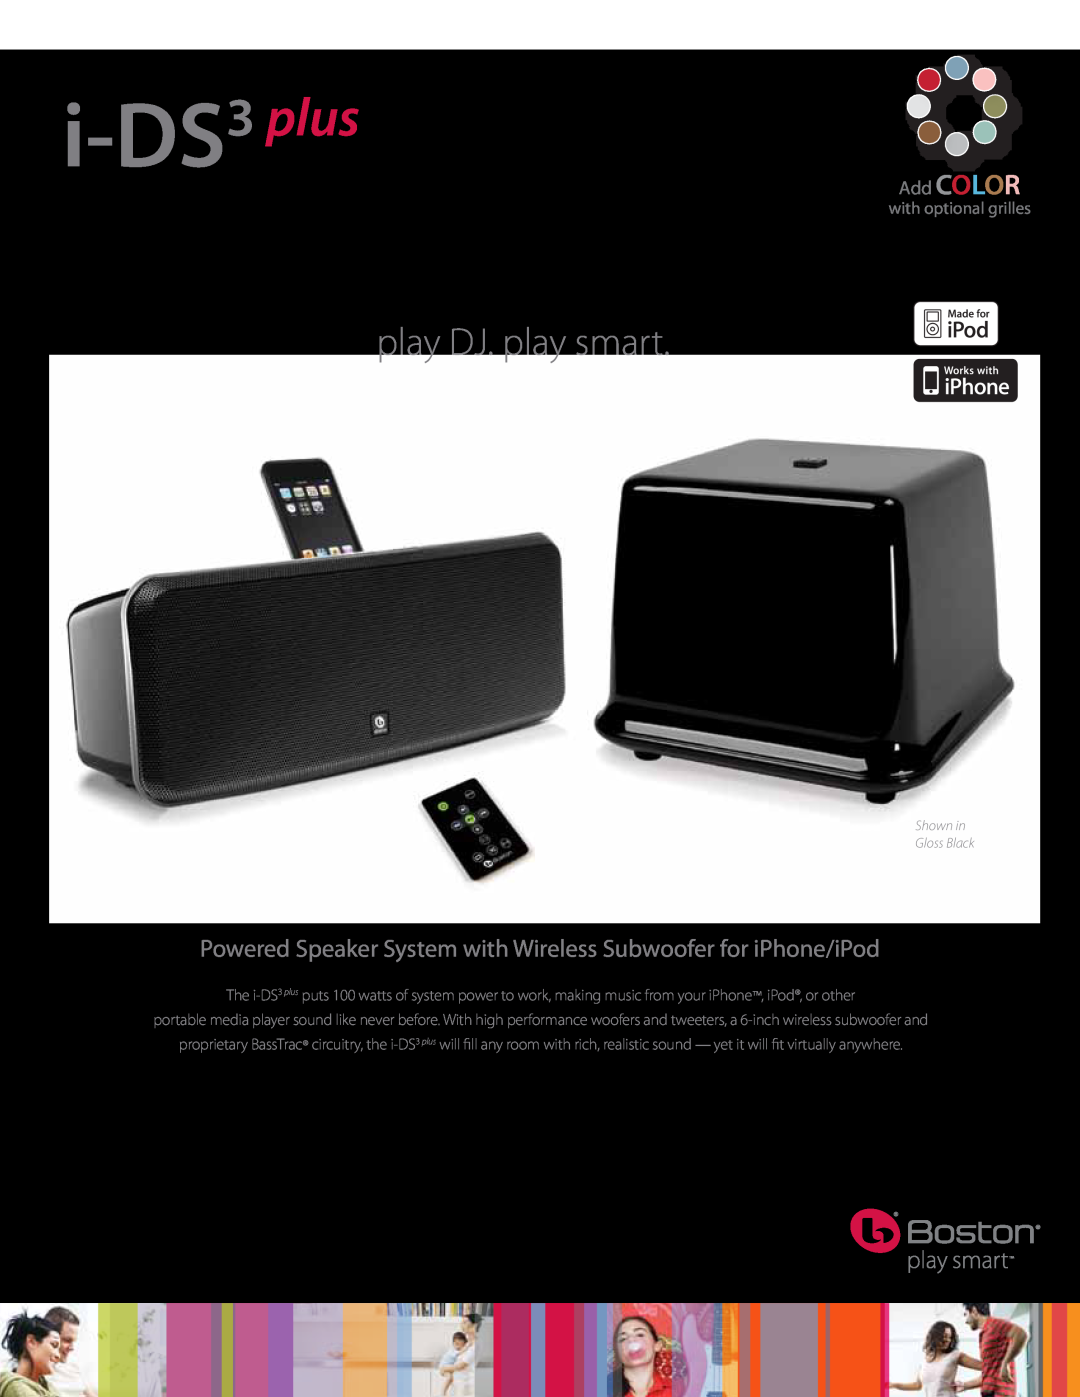 Boston Acoustics I-DS3 plus manual i-DS3 plus, play DJ. play smart, Add COLOR, with optional grilles 